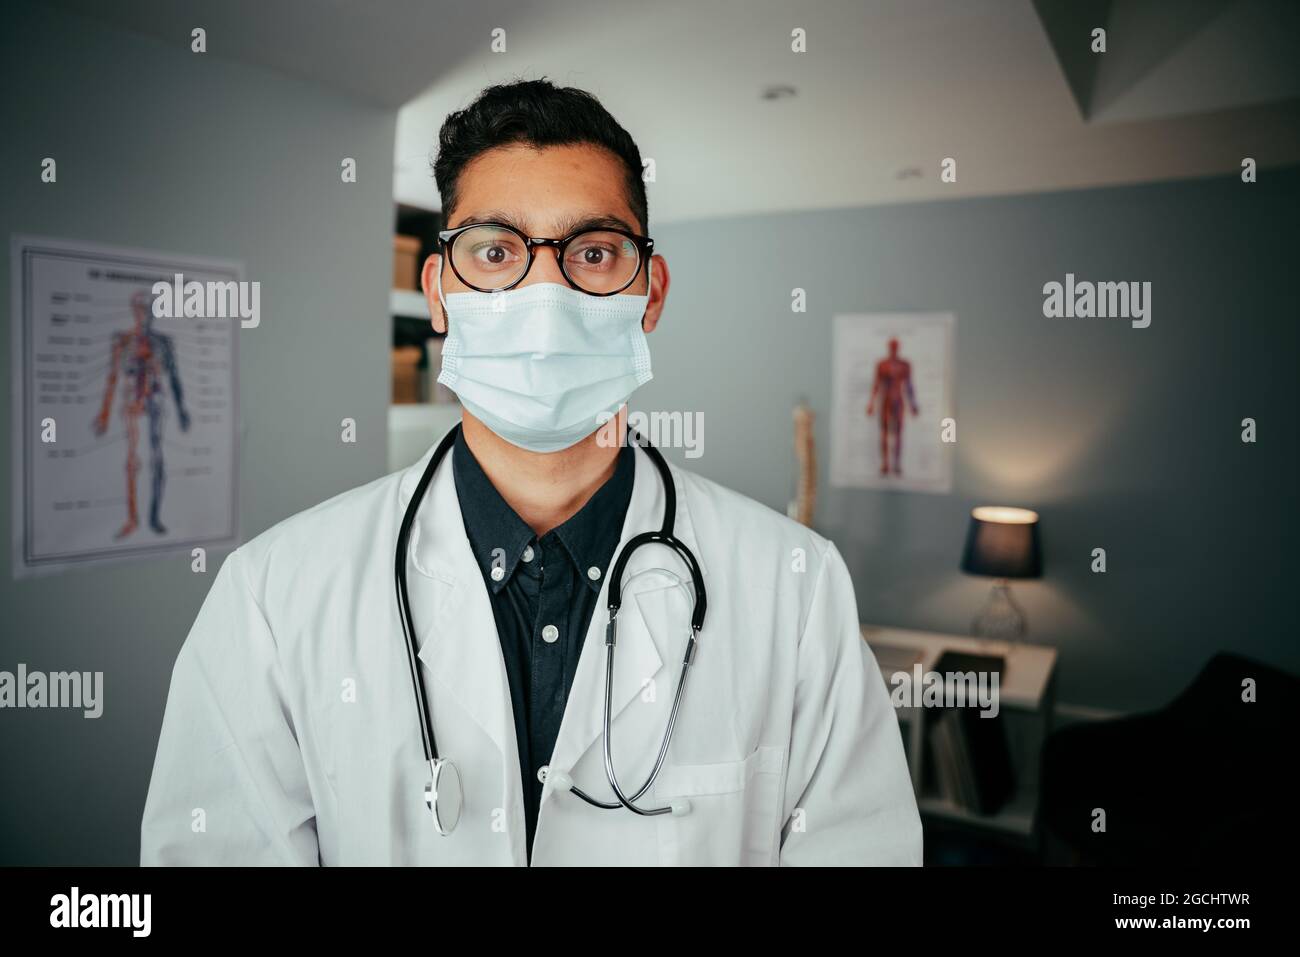 Mixed race professional doctor working in clinic wearing mask Stock Photo